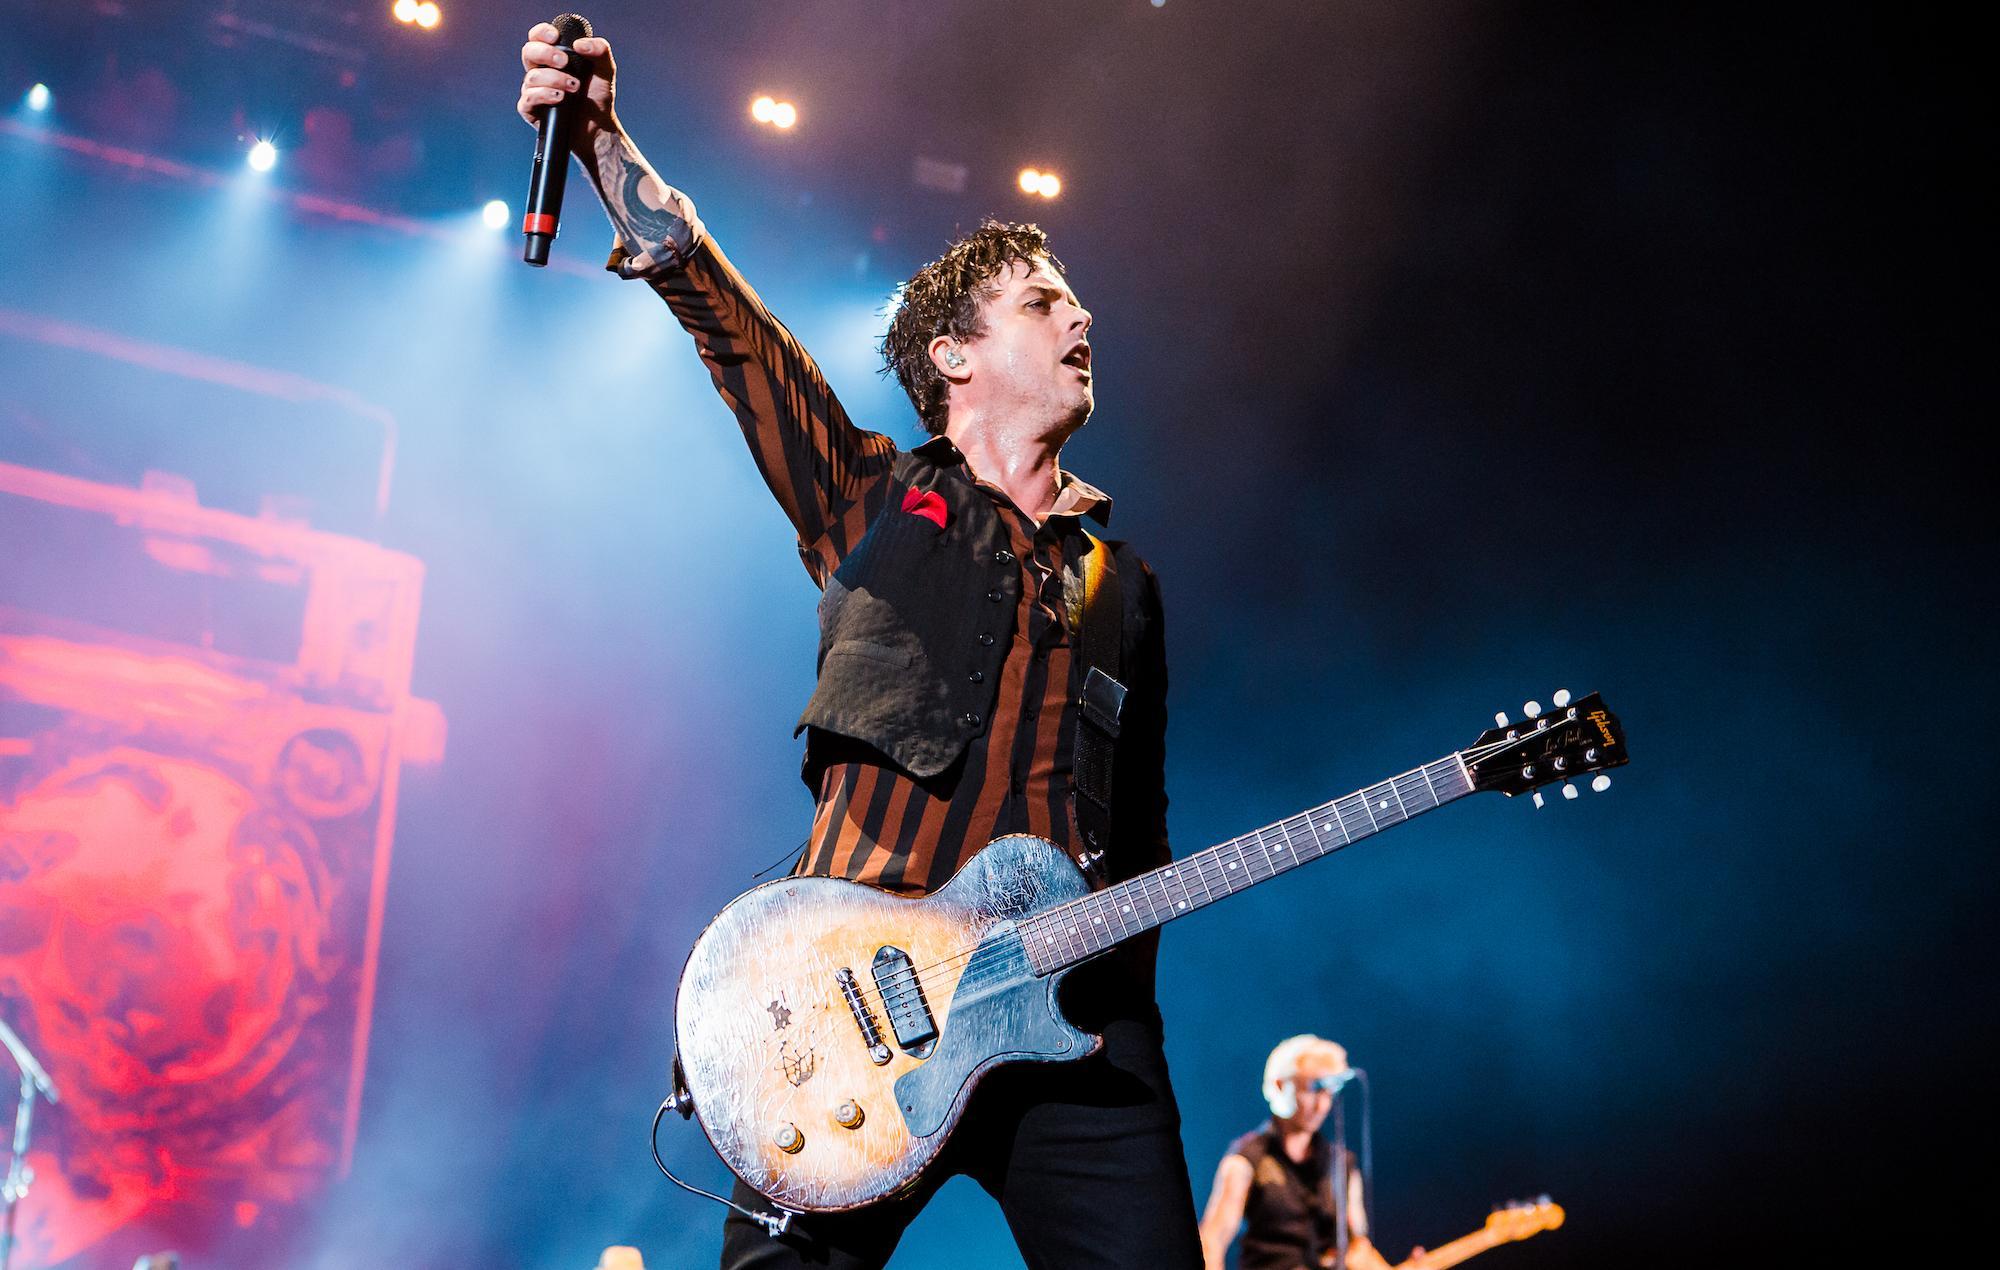 Green Day's 2020 album 'Father Of All.', release